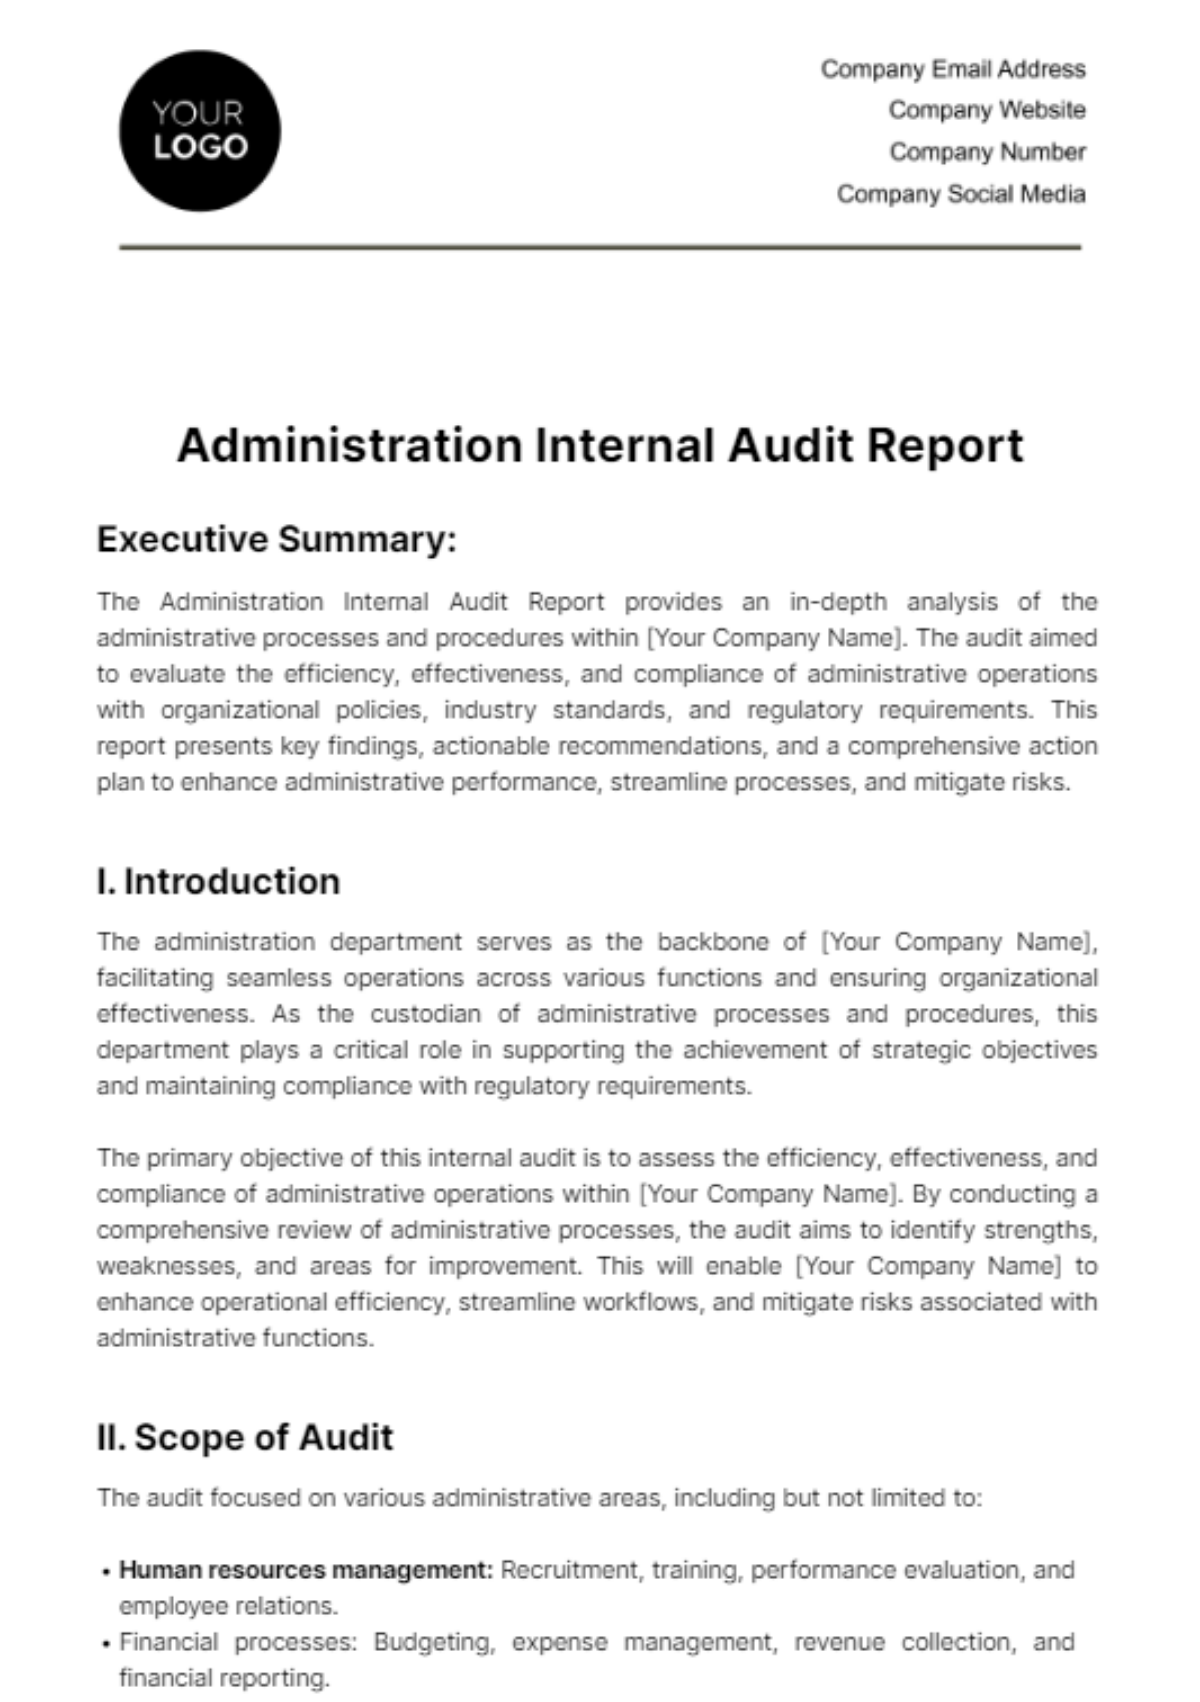 Administration Internal Audit Report Template